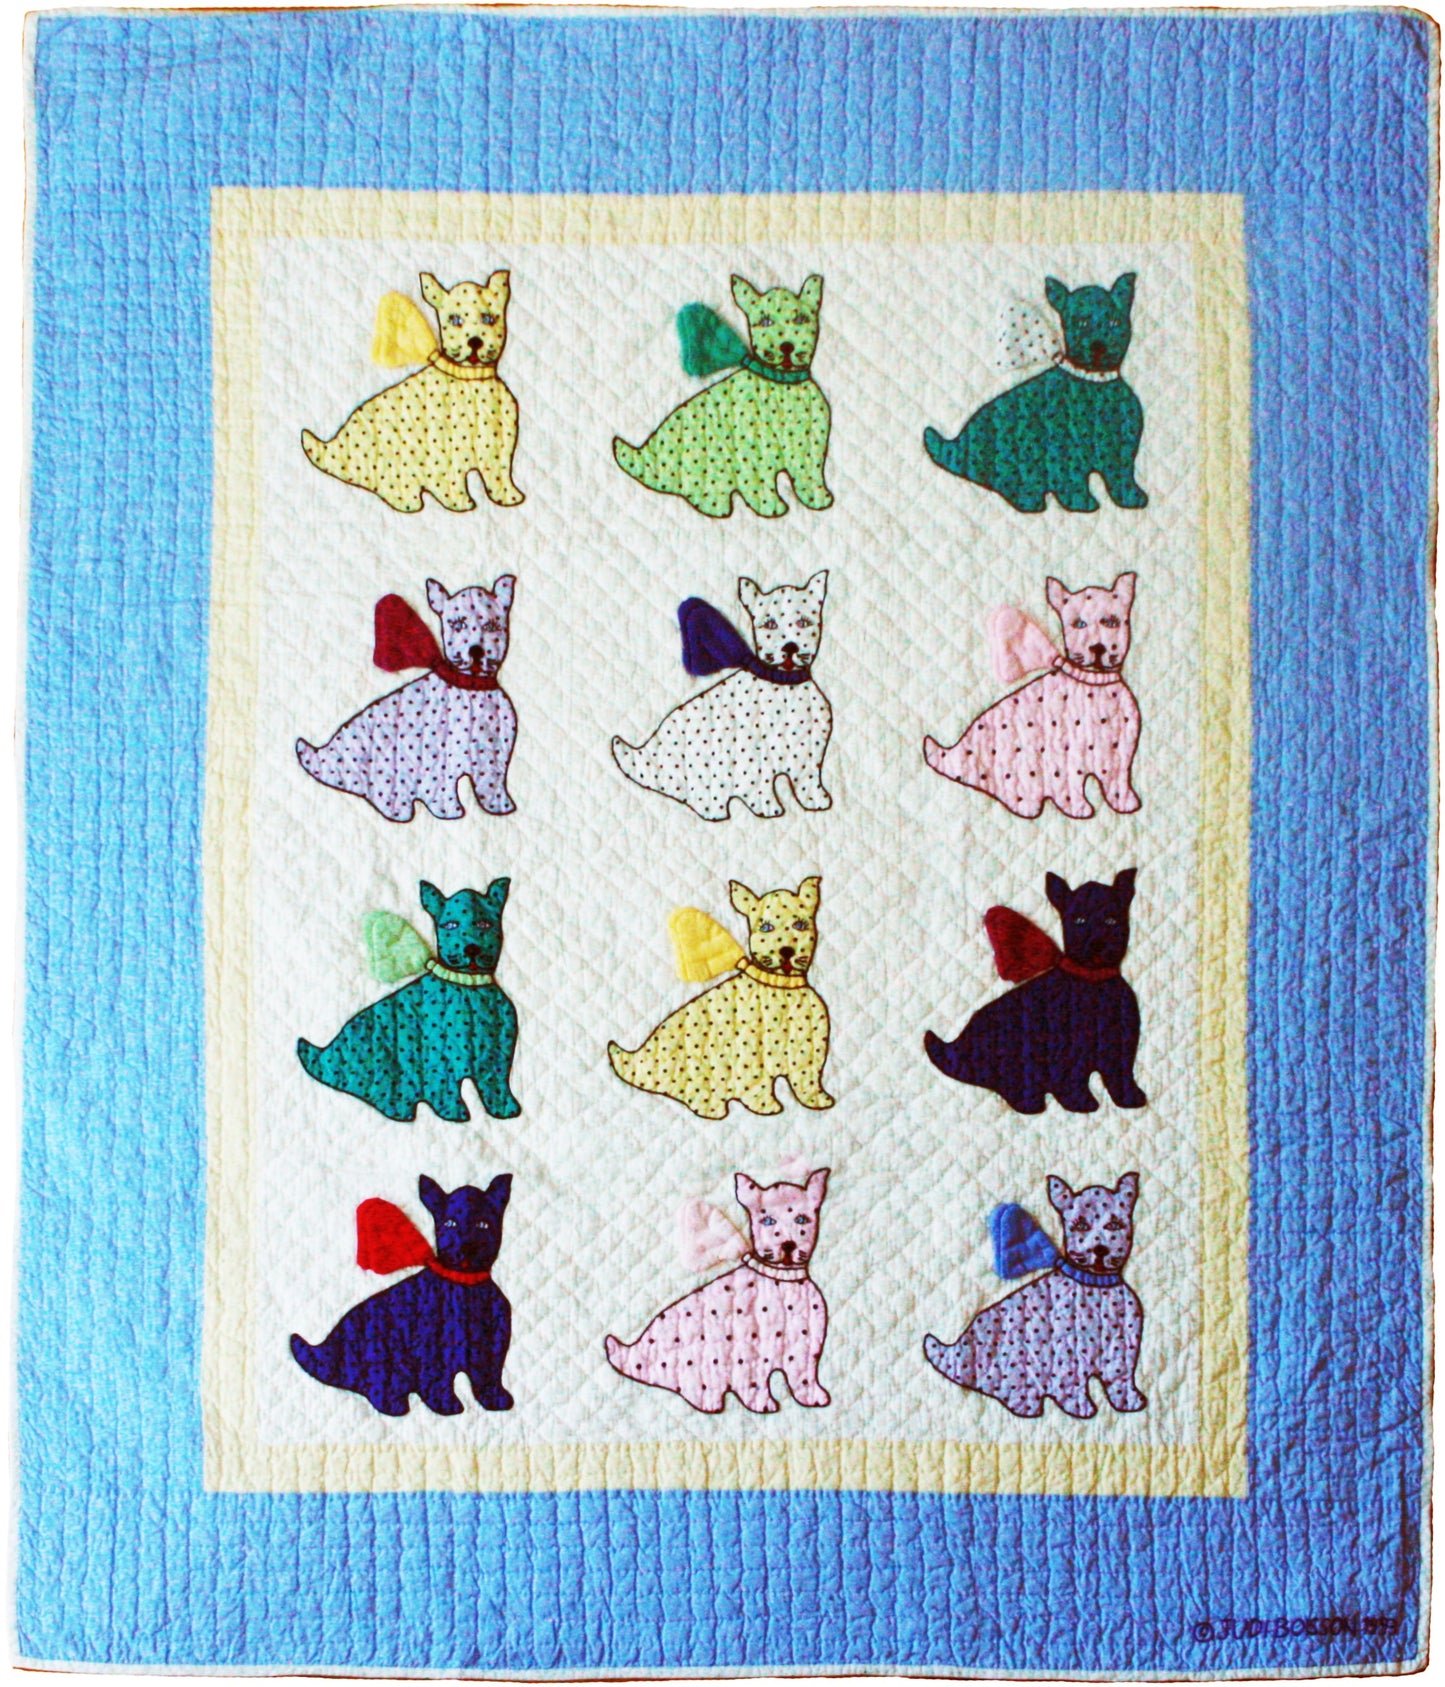 "Polka Dotted Dog" Multi-Color Crib Quilt 43" x 53"